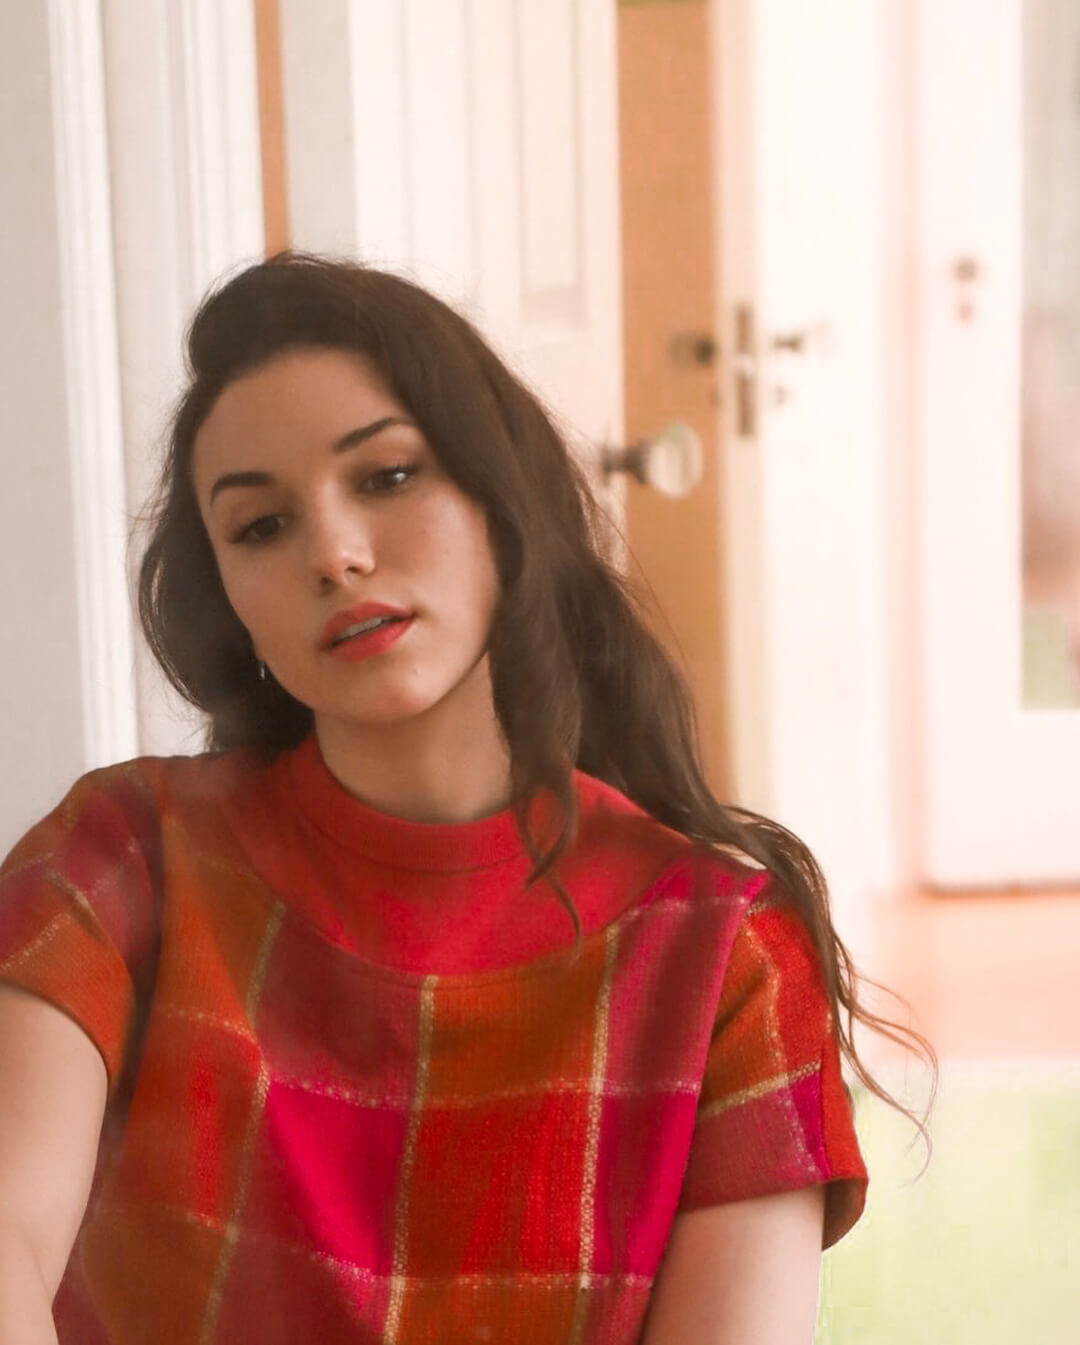 The Hottest Grace Fulton Photos Around The Net.